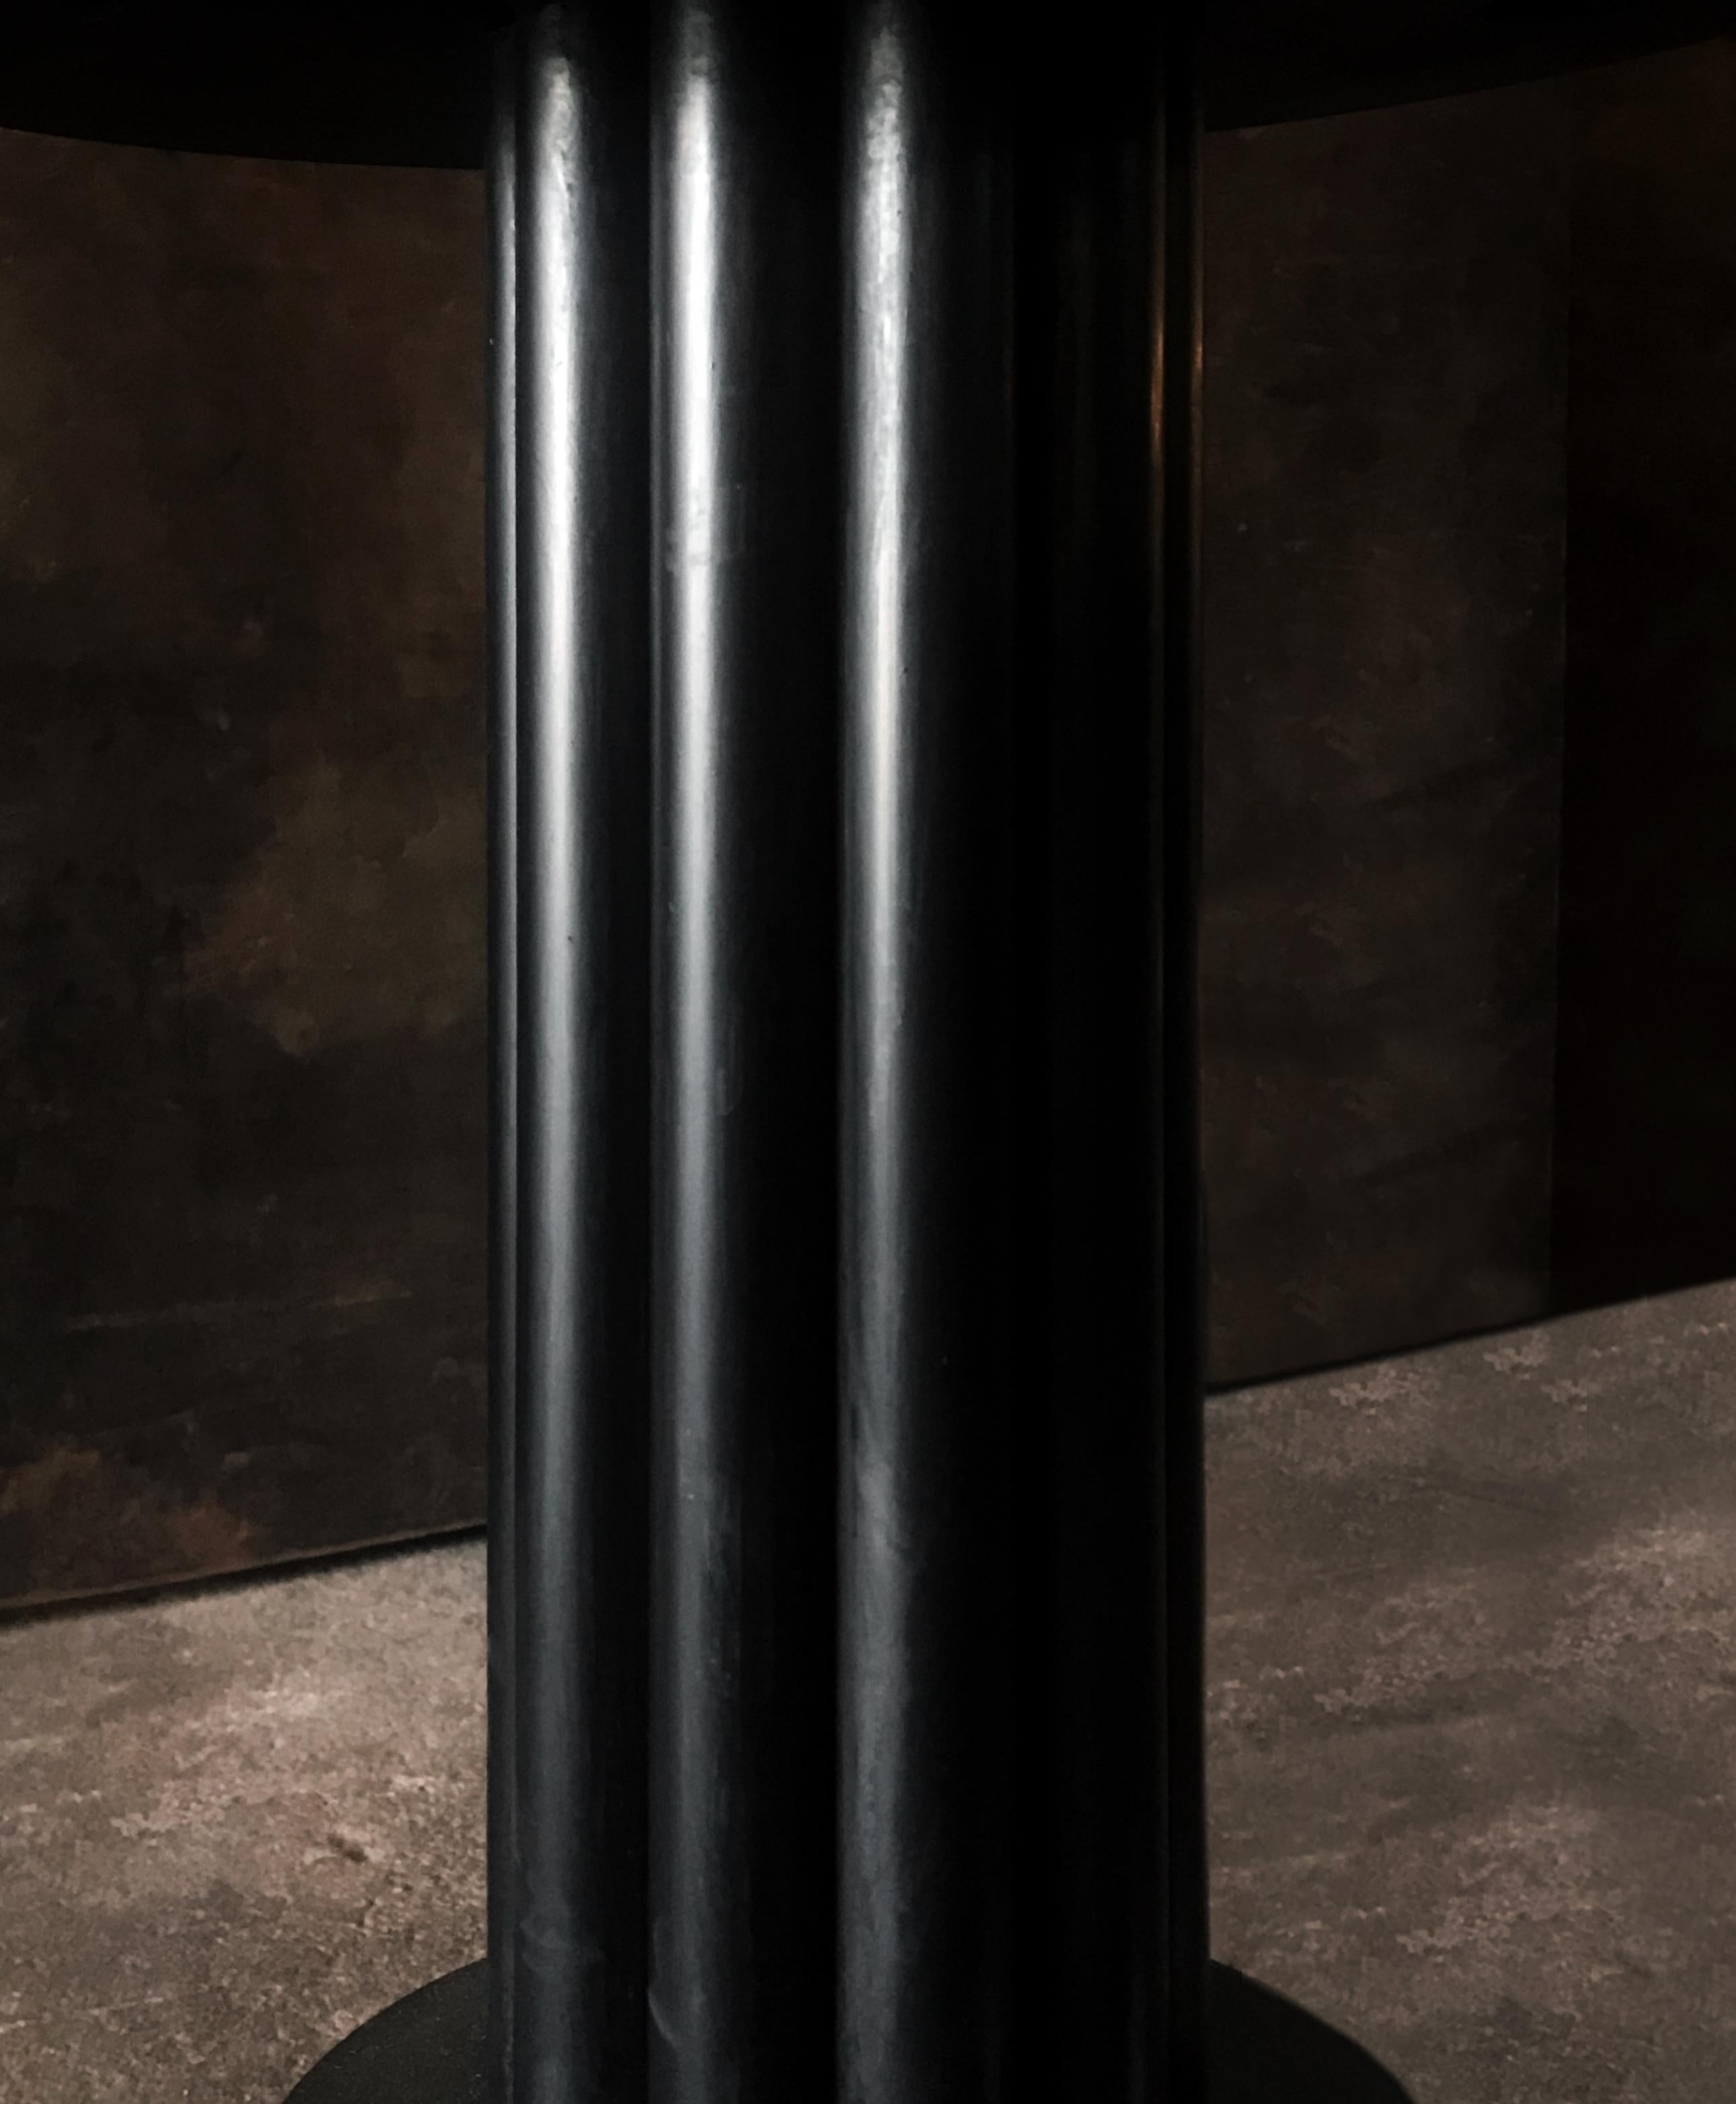 The (wh)ORE HAUS STUDIOS barstools are offered In two, adjustable heights  
 -Counter Height (adjustable from 23-28”) or 
- Bar Height (adjustable from 28-33”). 
 
 -Stools are offered in x3 finishes- Blackened Steel, Bronze Rubbed Steel and